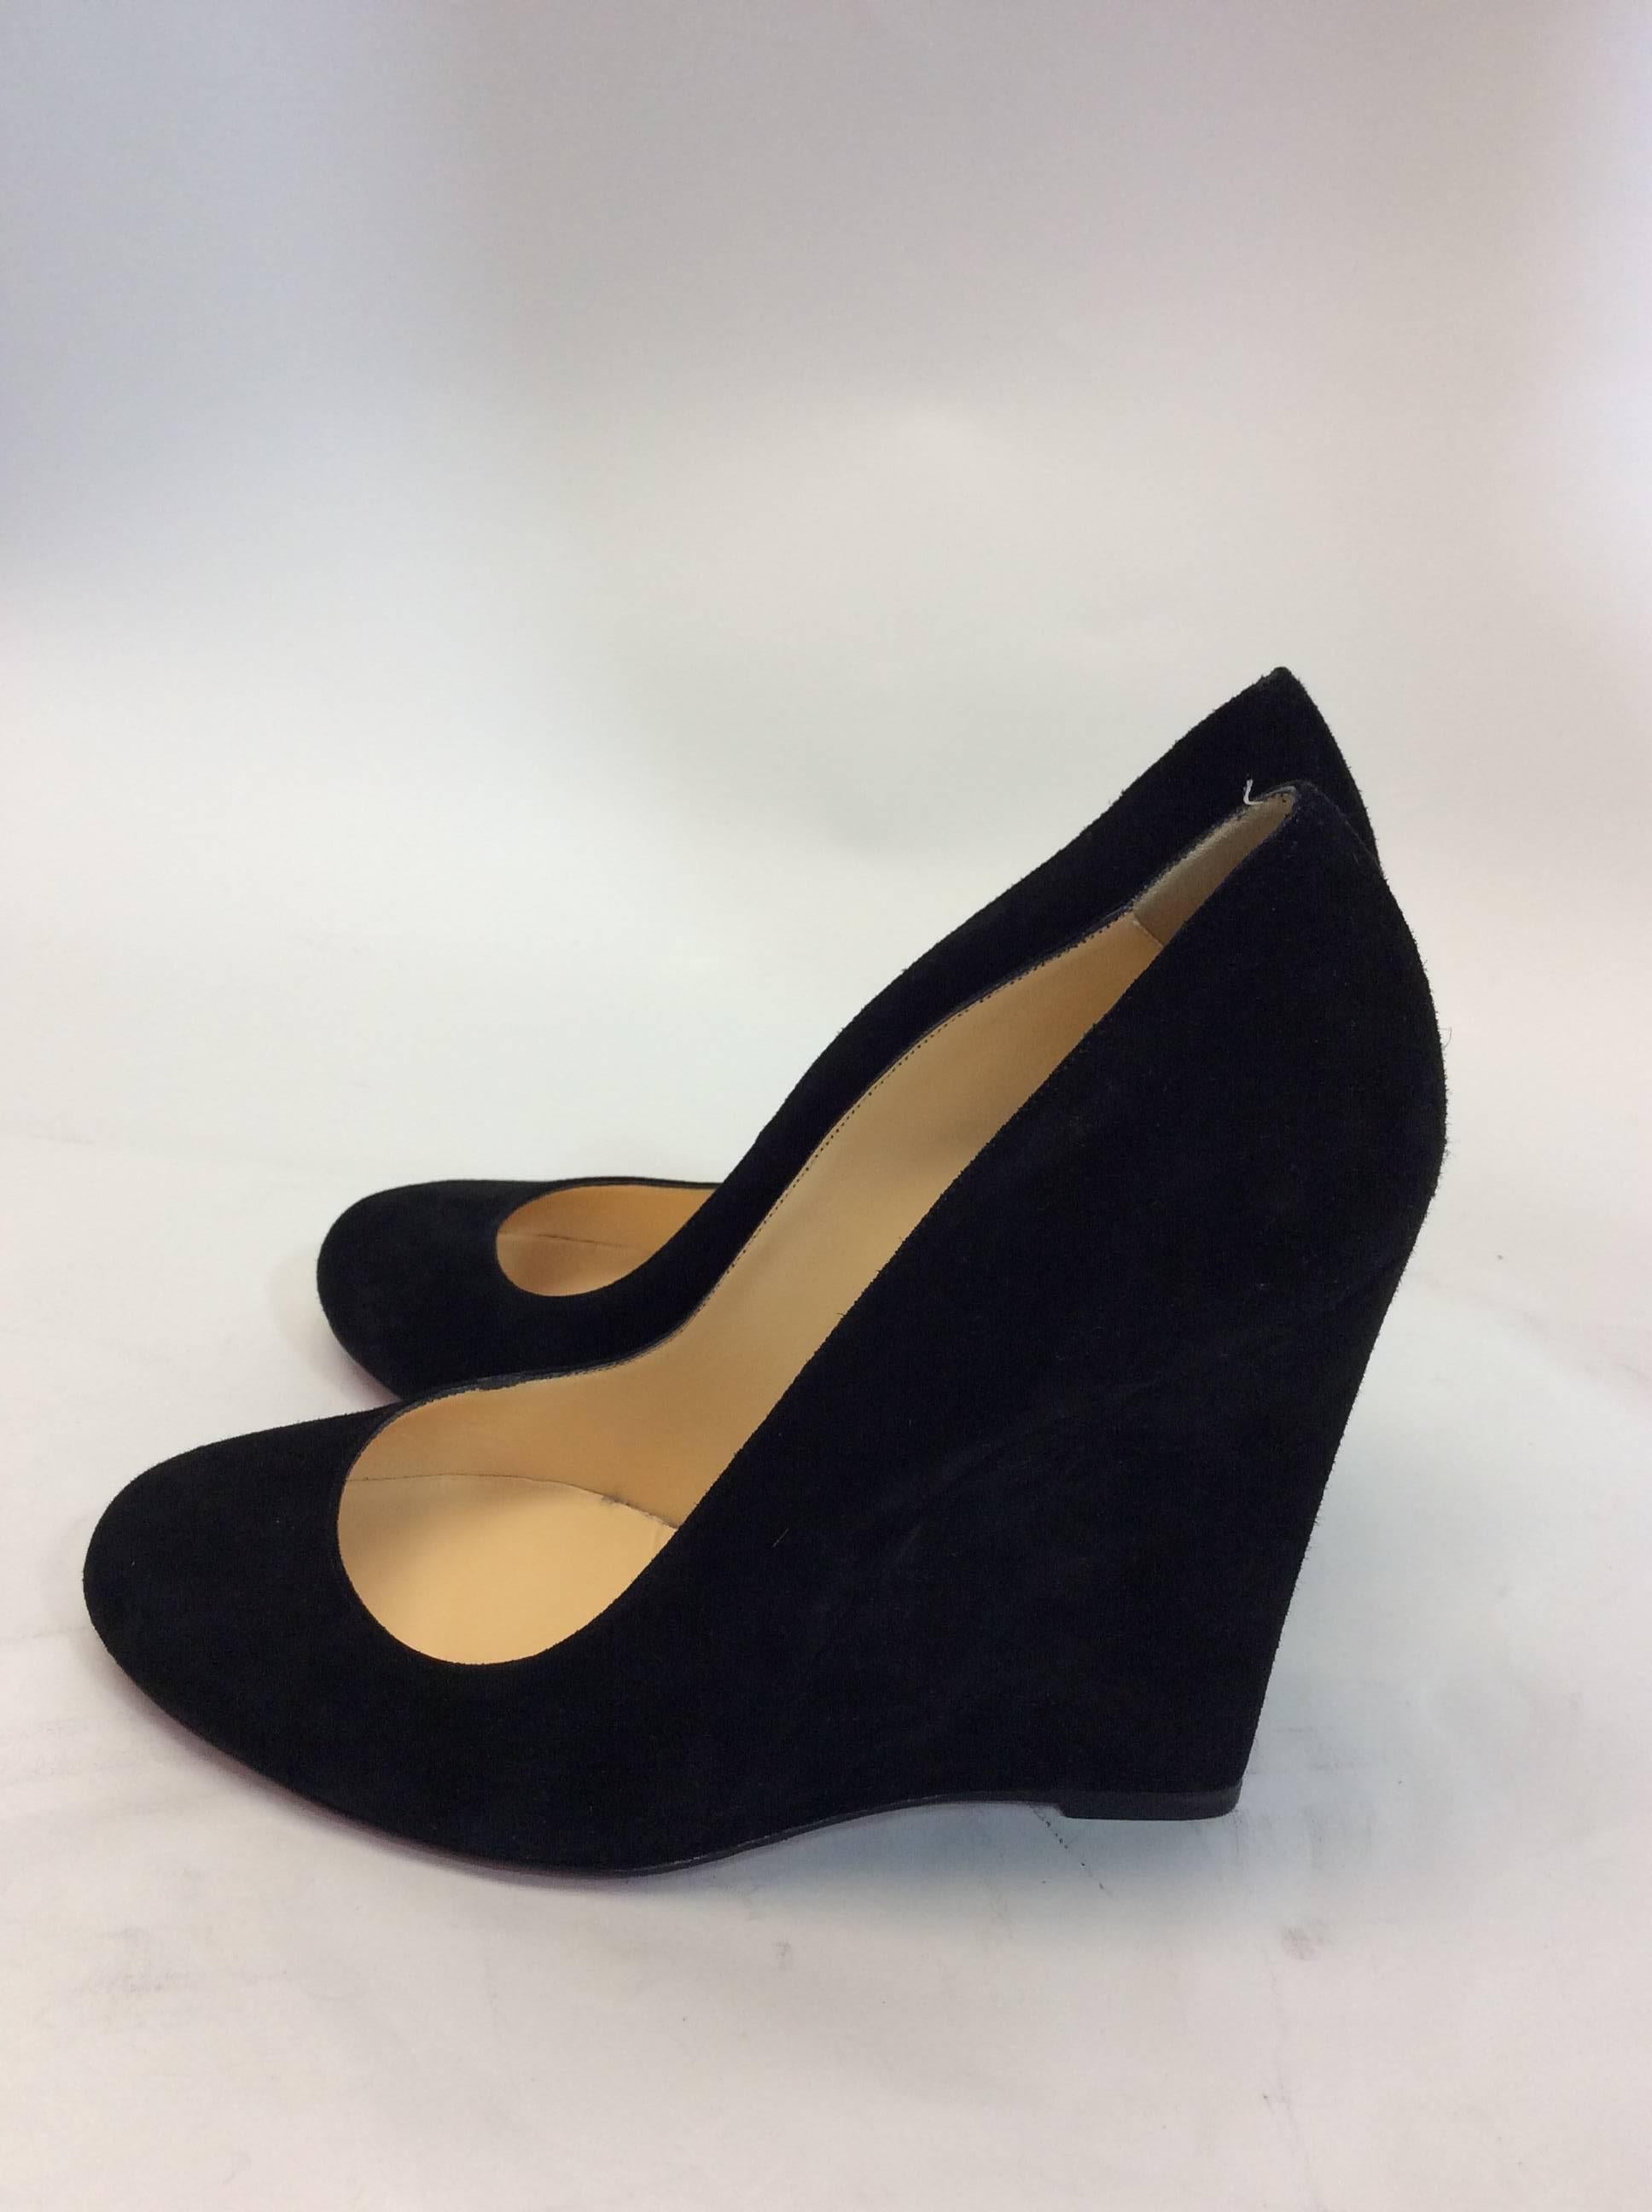 Christian Louboutin Black Suede Closed Toe Wedge
4.5 inch wedge
$450
Made in France
Size 38.5
